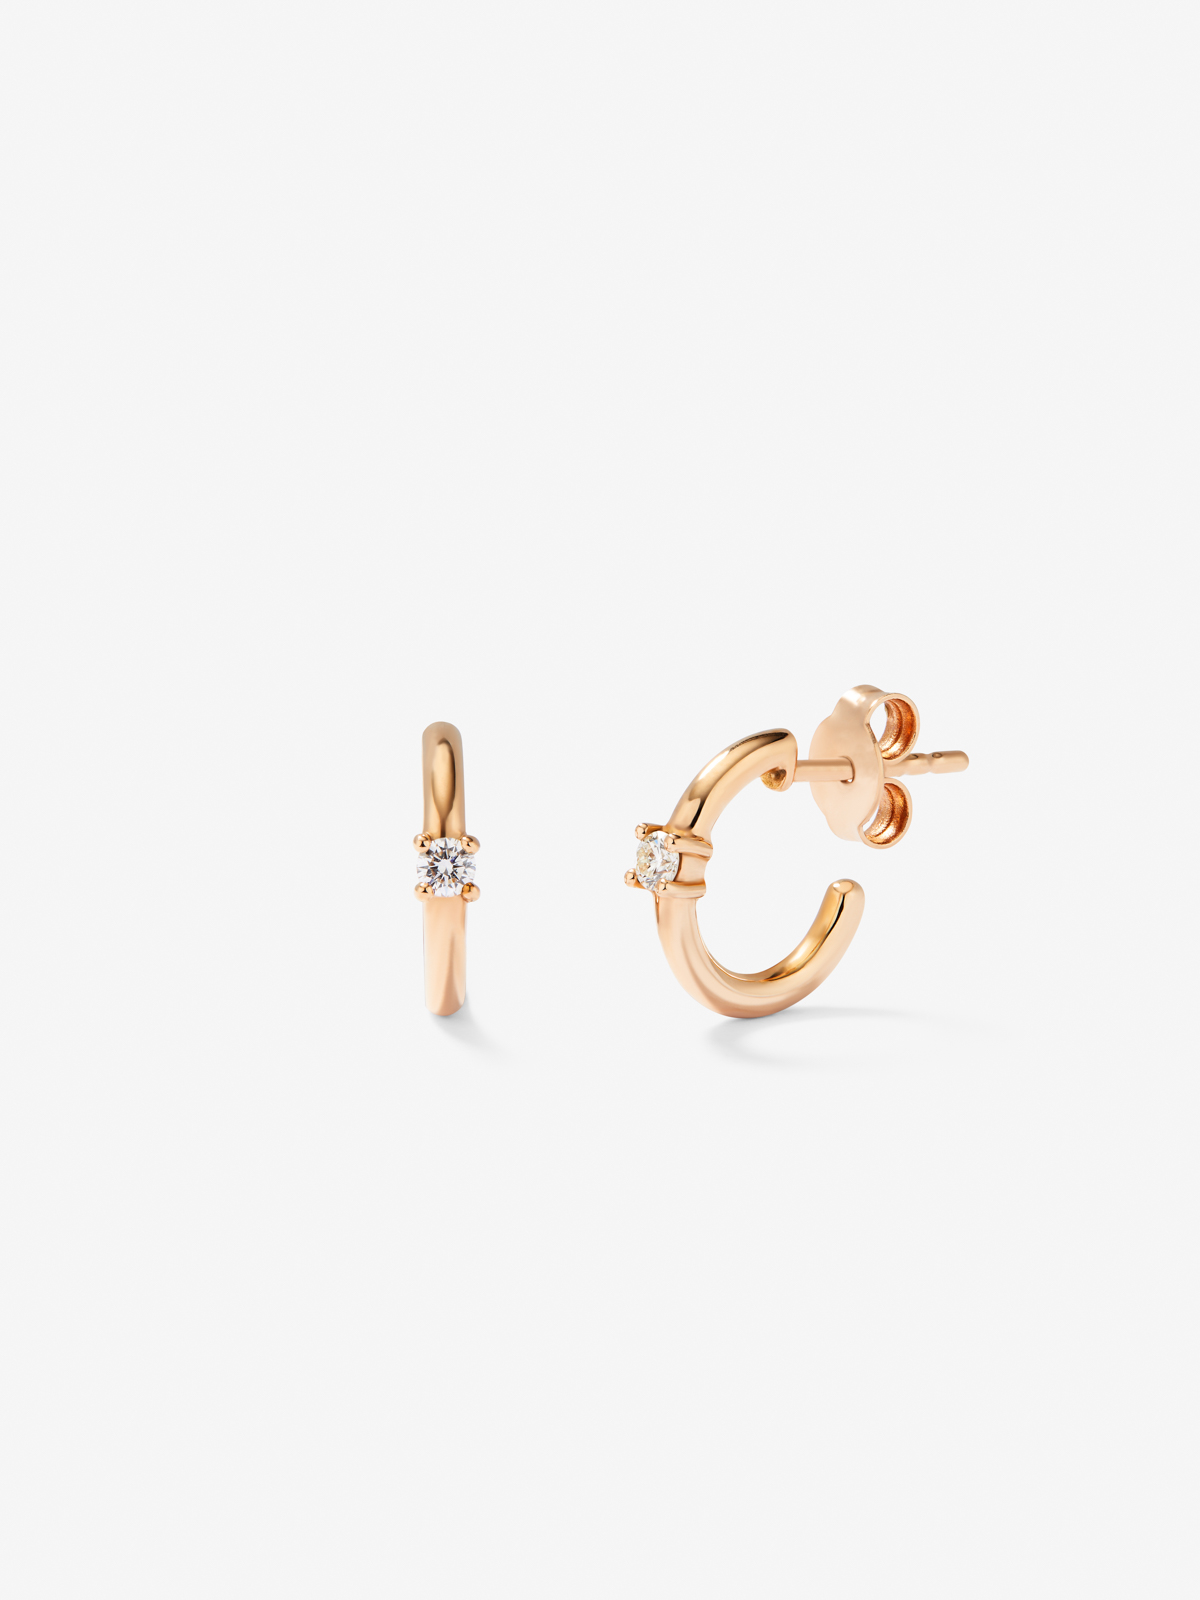 18kt rose gold earrings with diamonds